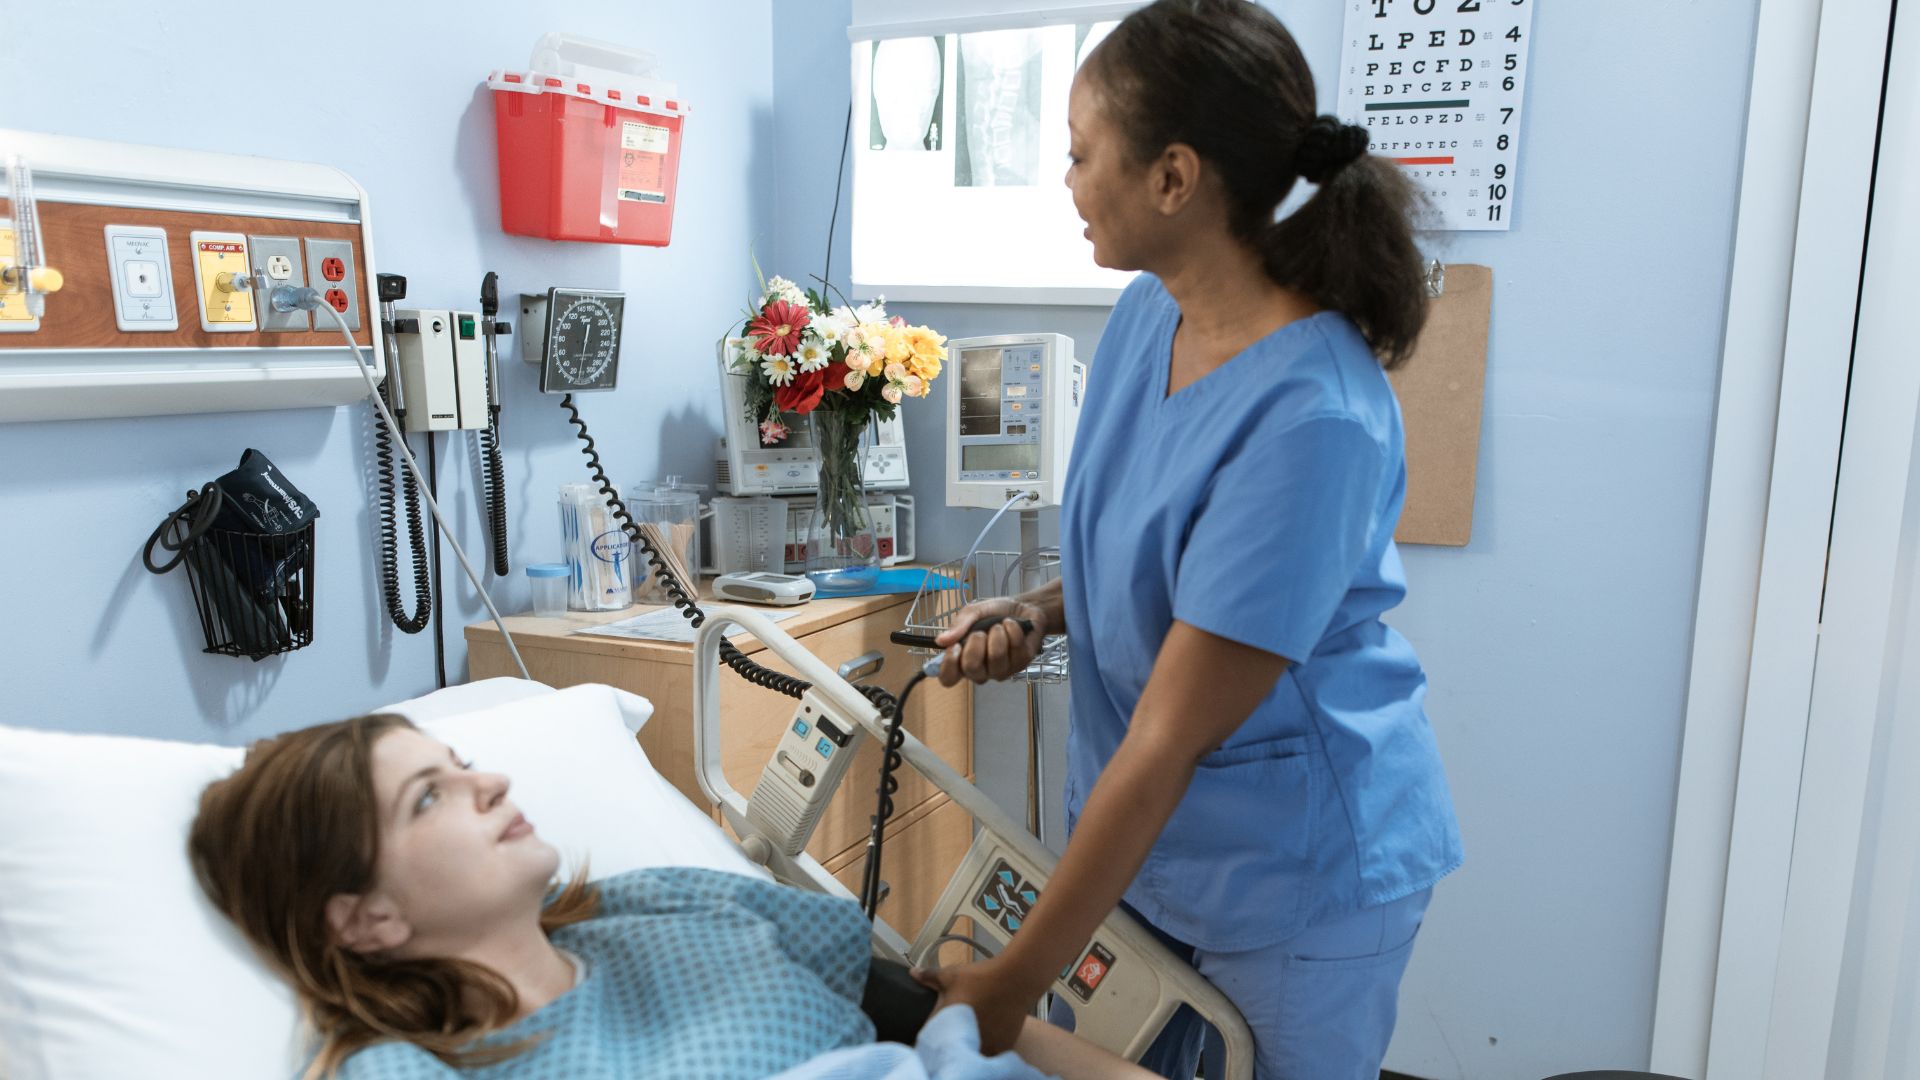 A registered nurse dutifully tends to her patient, who's laid back in her bed. Image demonstrates the importance of bedside manner for registered nurses.